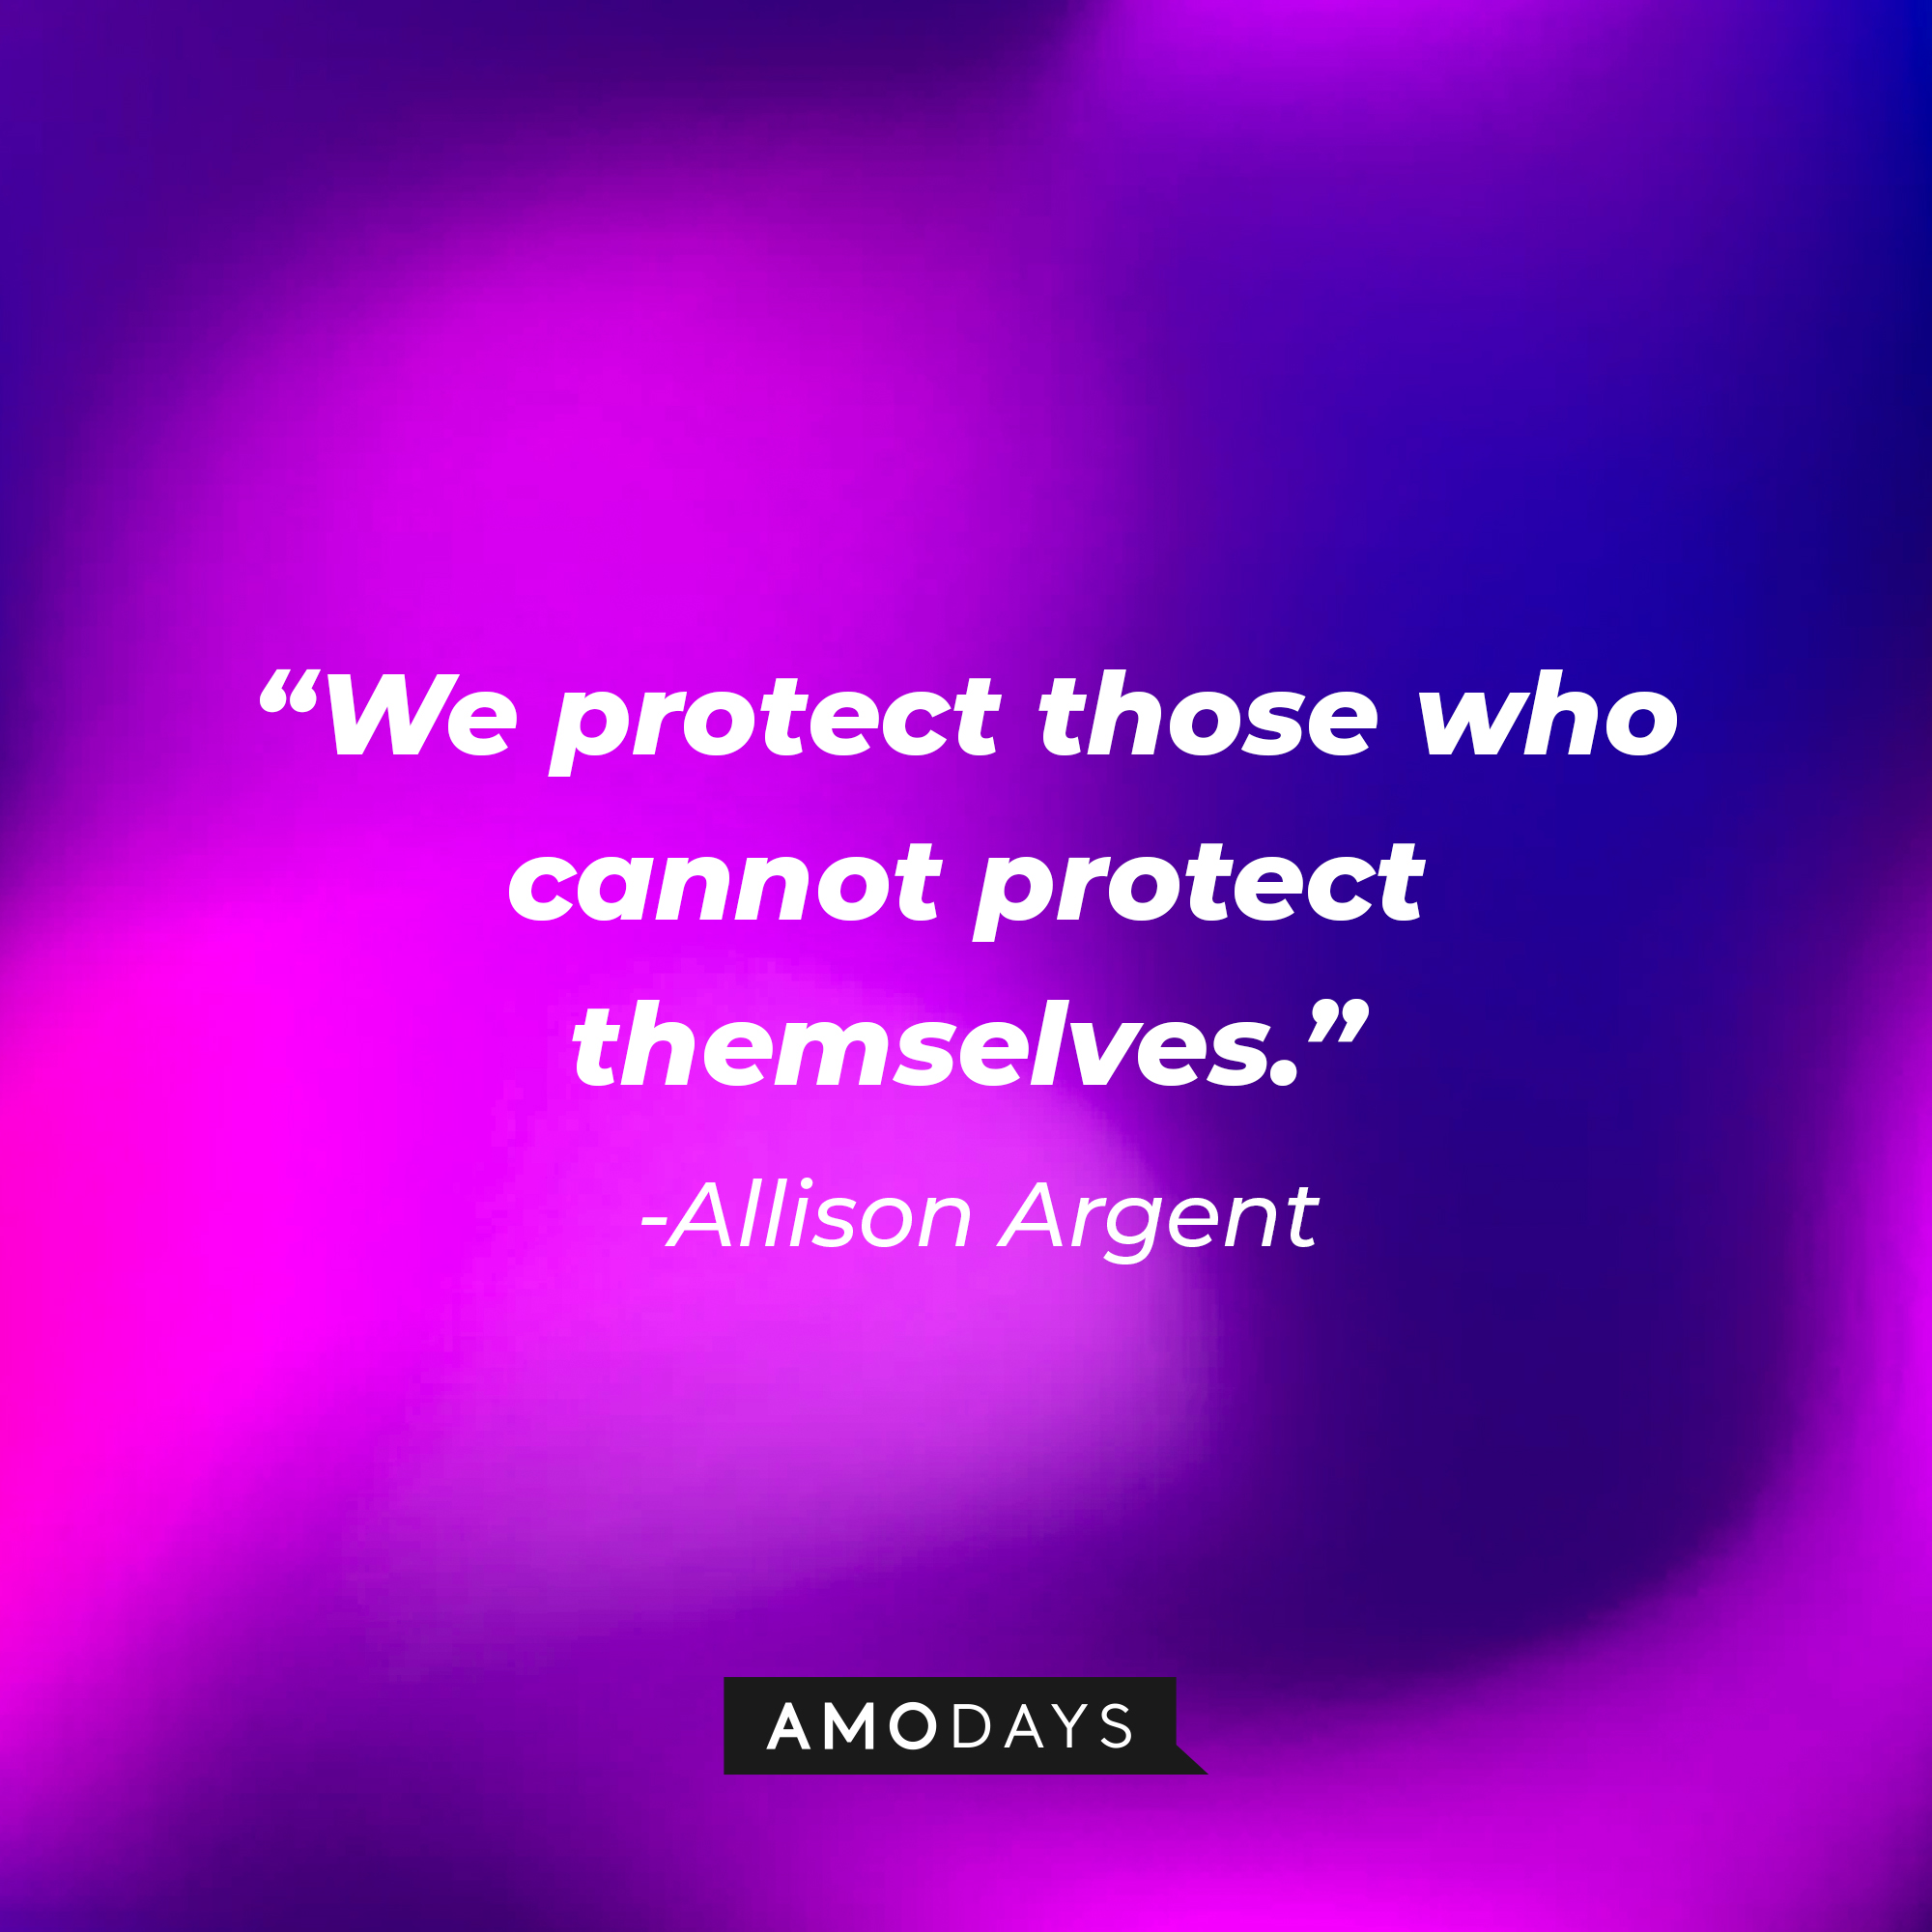 Allison Argen’s quote: "We protect those who cannot protect themselves." | Source: AmoDays